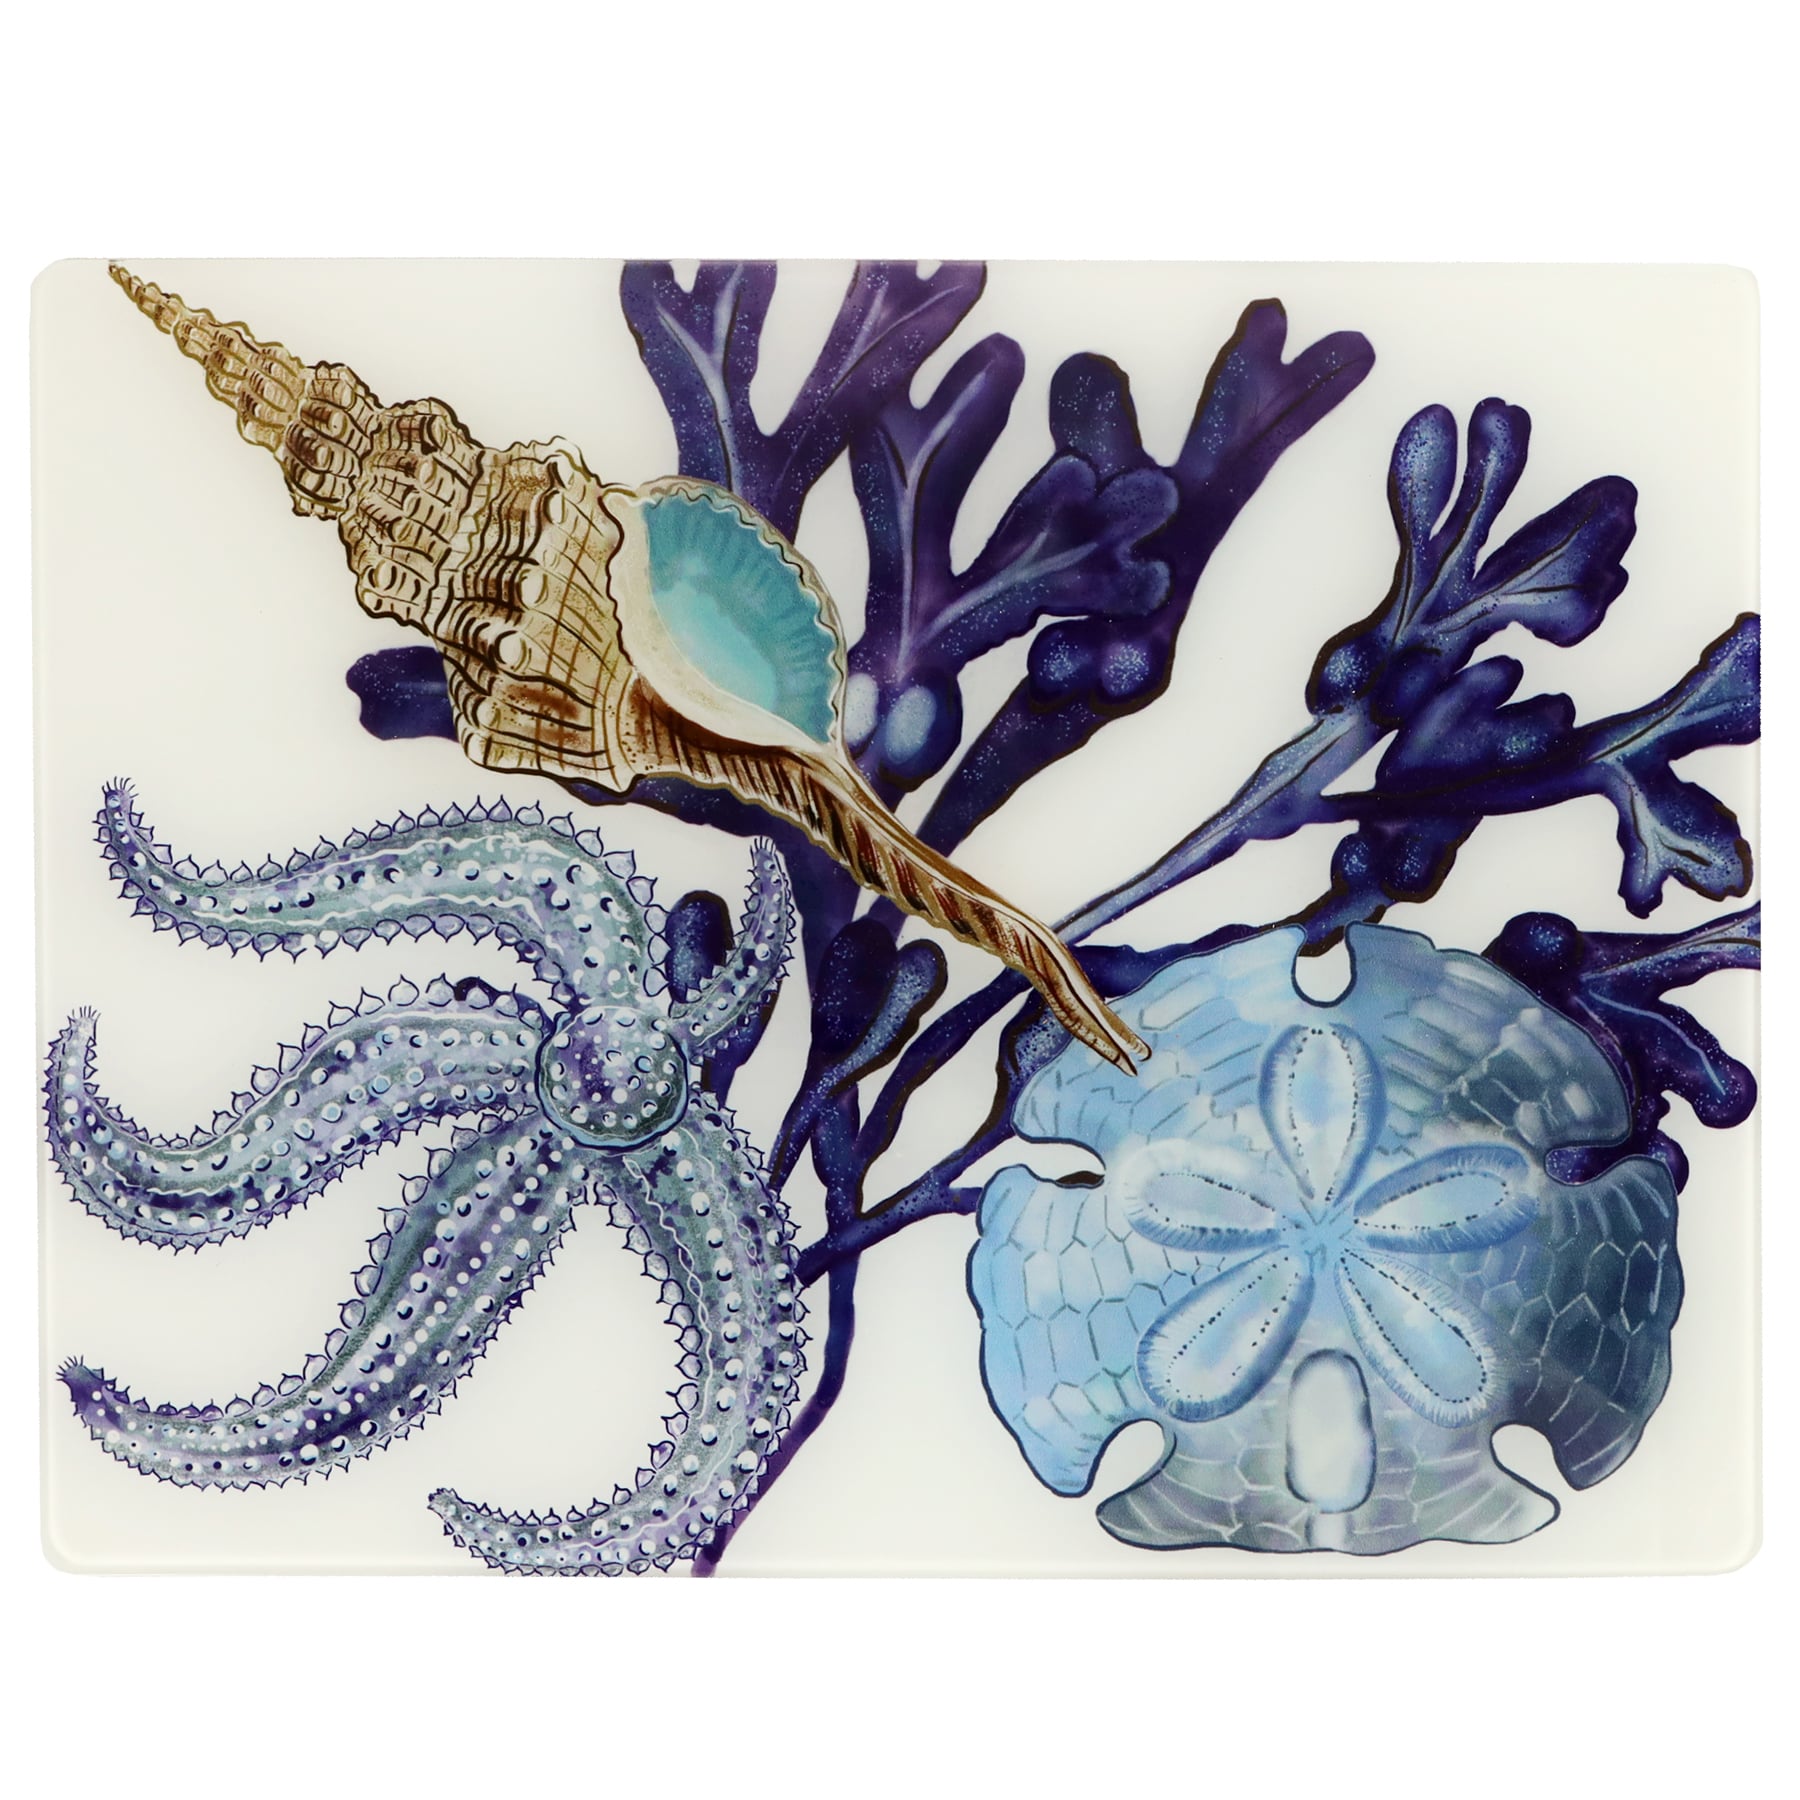 Glass worktop saver in our Beachcomber design with Starfish,a whelk,seaweed and a sand dollar design.